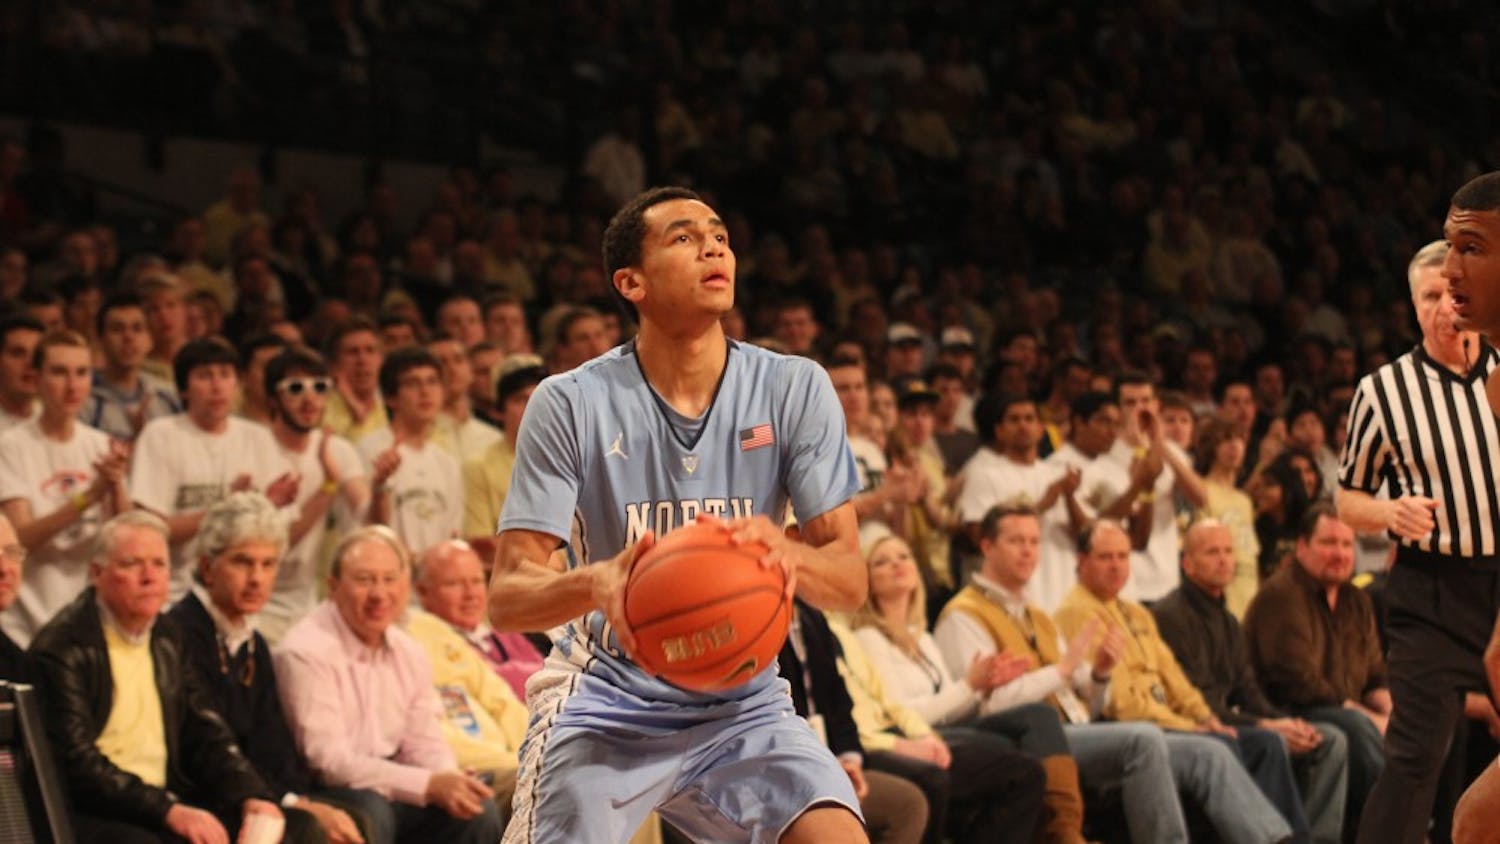 	Marcus Paige sets up before attempting a three pointer. Paige was 0-3 from the 3 point line, but contributed with 5 assists and 4 steals.